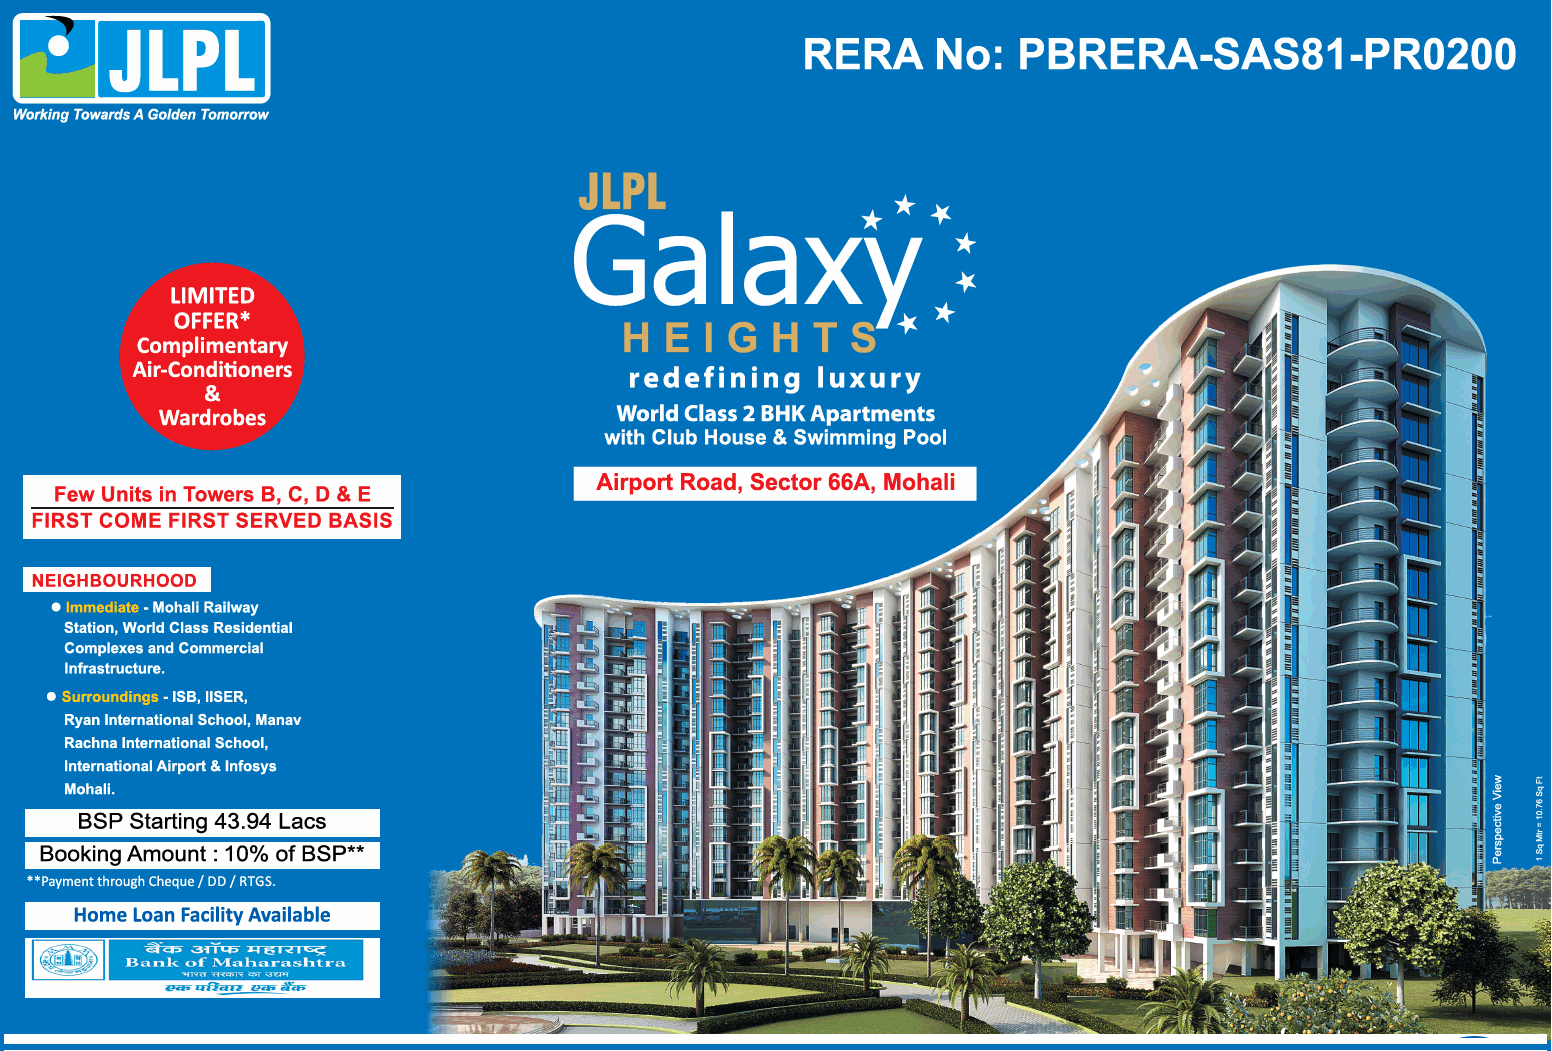 JLPL Galaxy Heights presenting world class 2 bhk apartments in Mohali Update